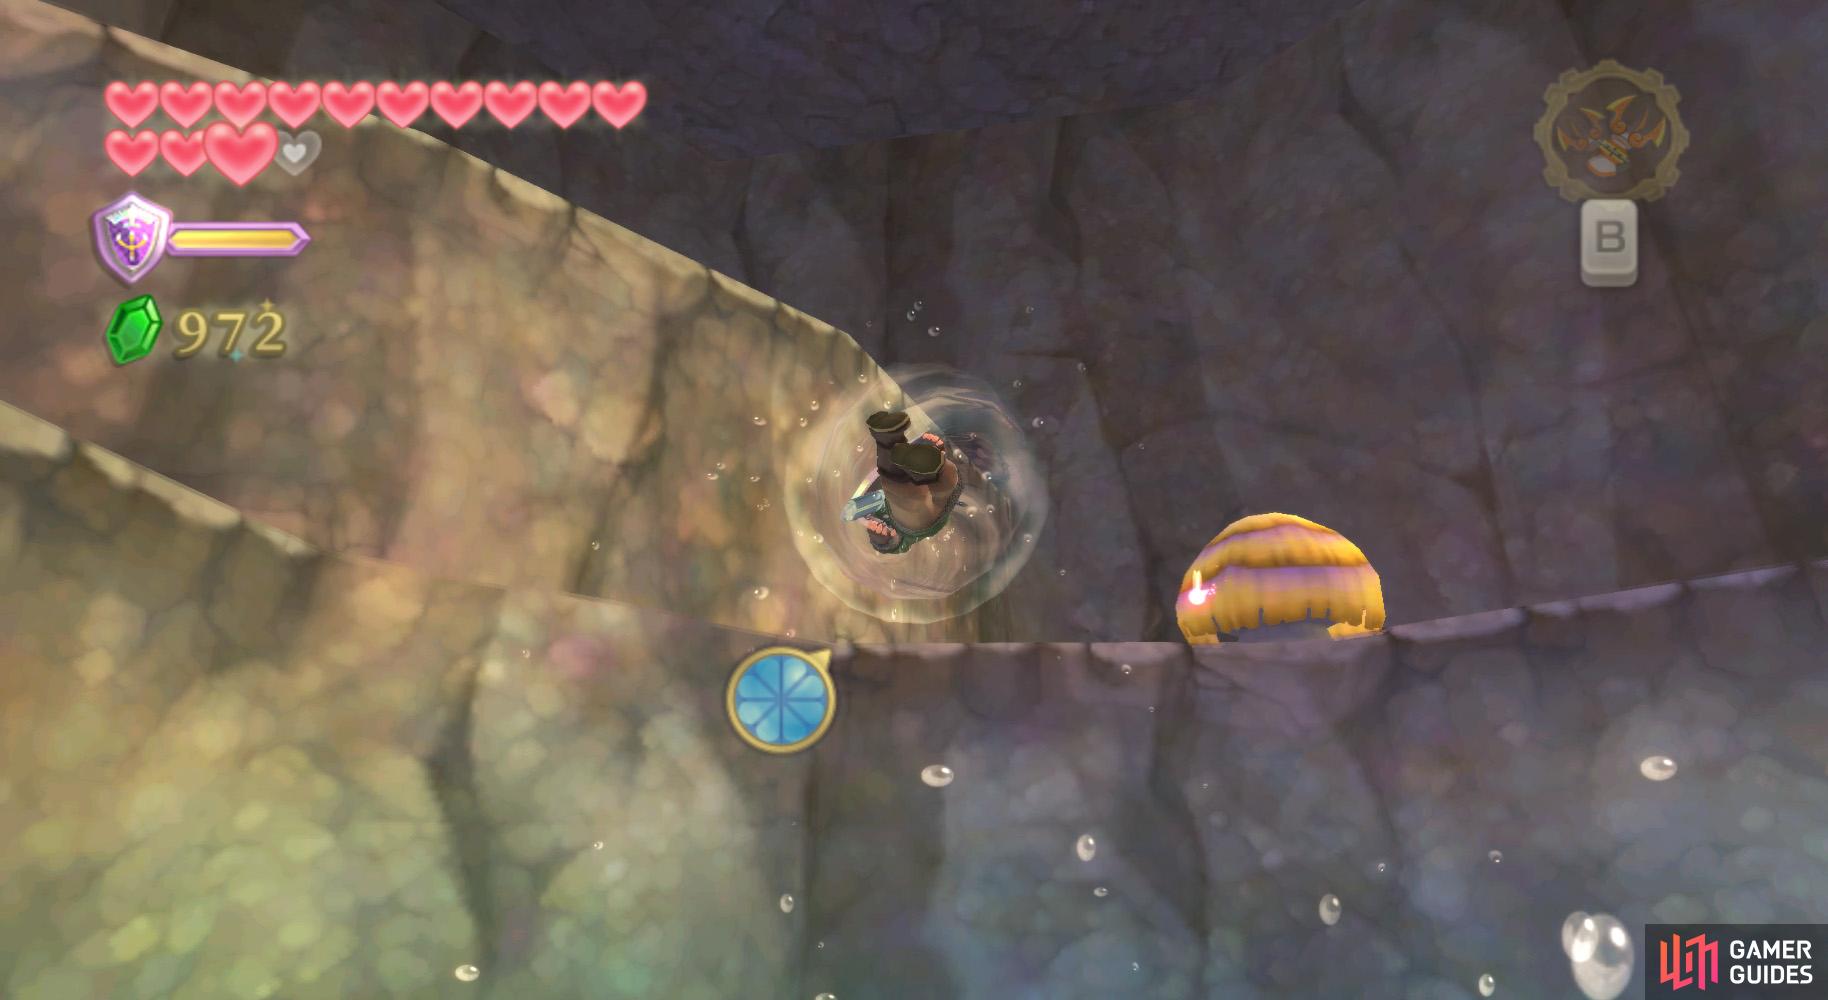 Fly to the northeastern island with a deep pond, then swim through the tunnel and use a spin attack at the end to climb up.